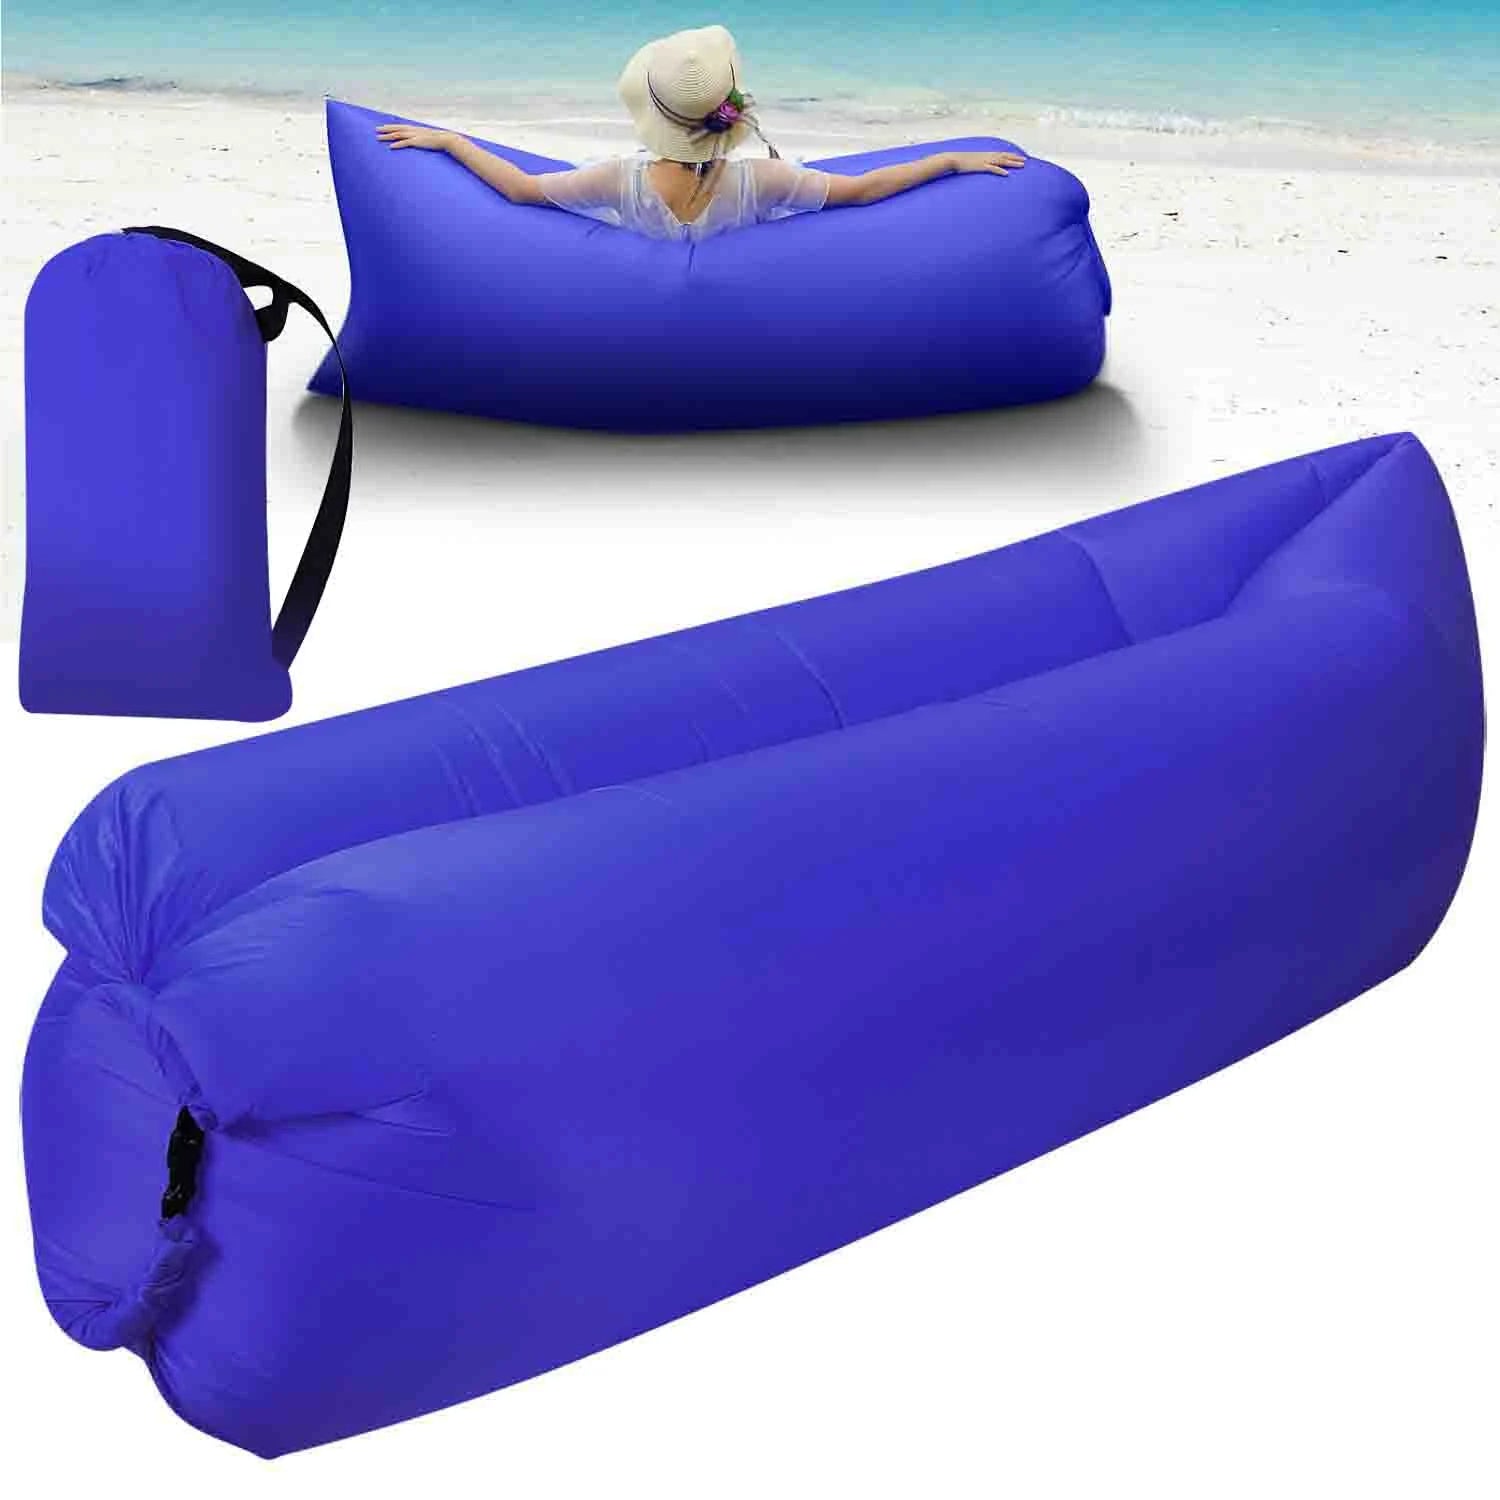 Inflatable Lounger Air Sofa Lazy Bed Sofa Portable Organizing Bag Water Resistant for Backyard Lakeside Beach Traveling Camping Picnics